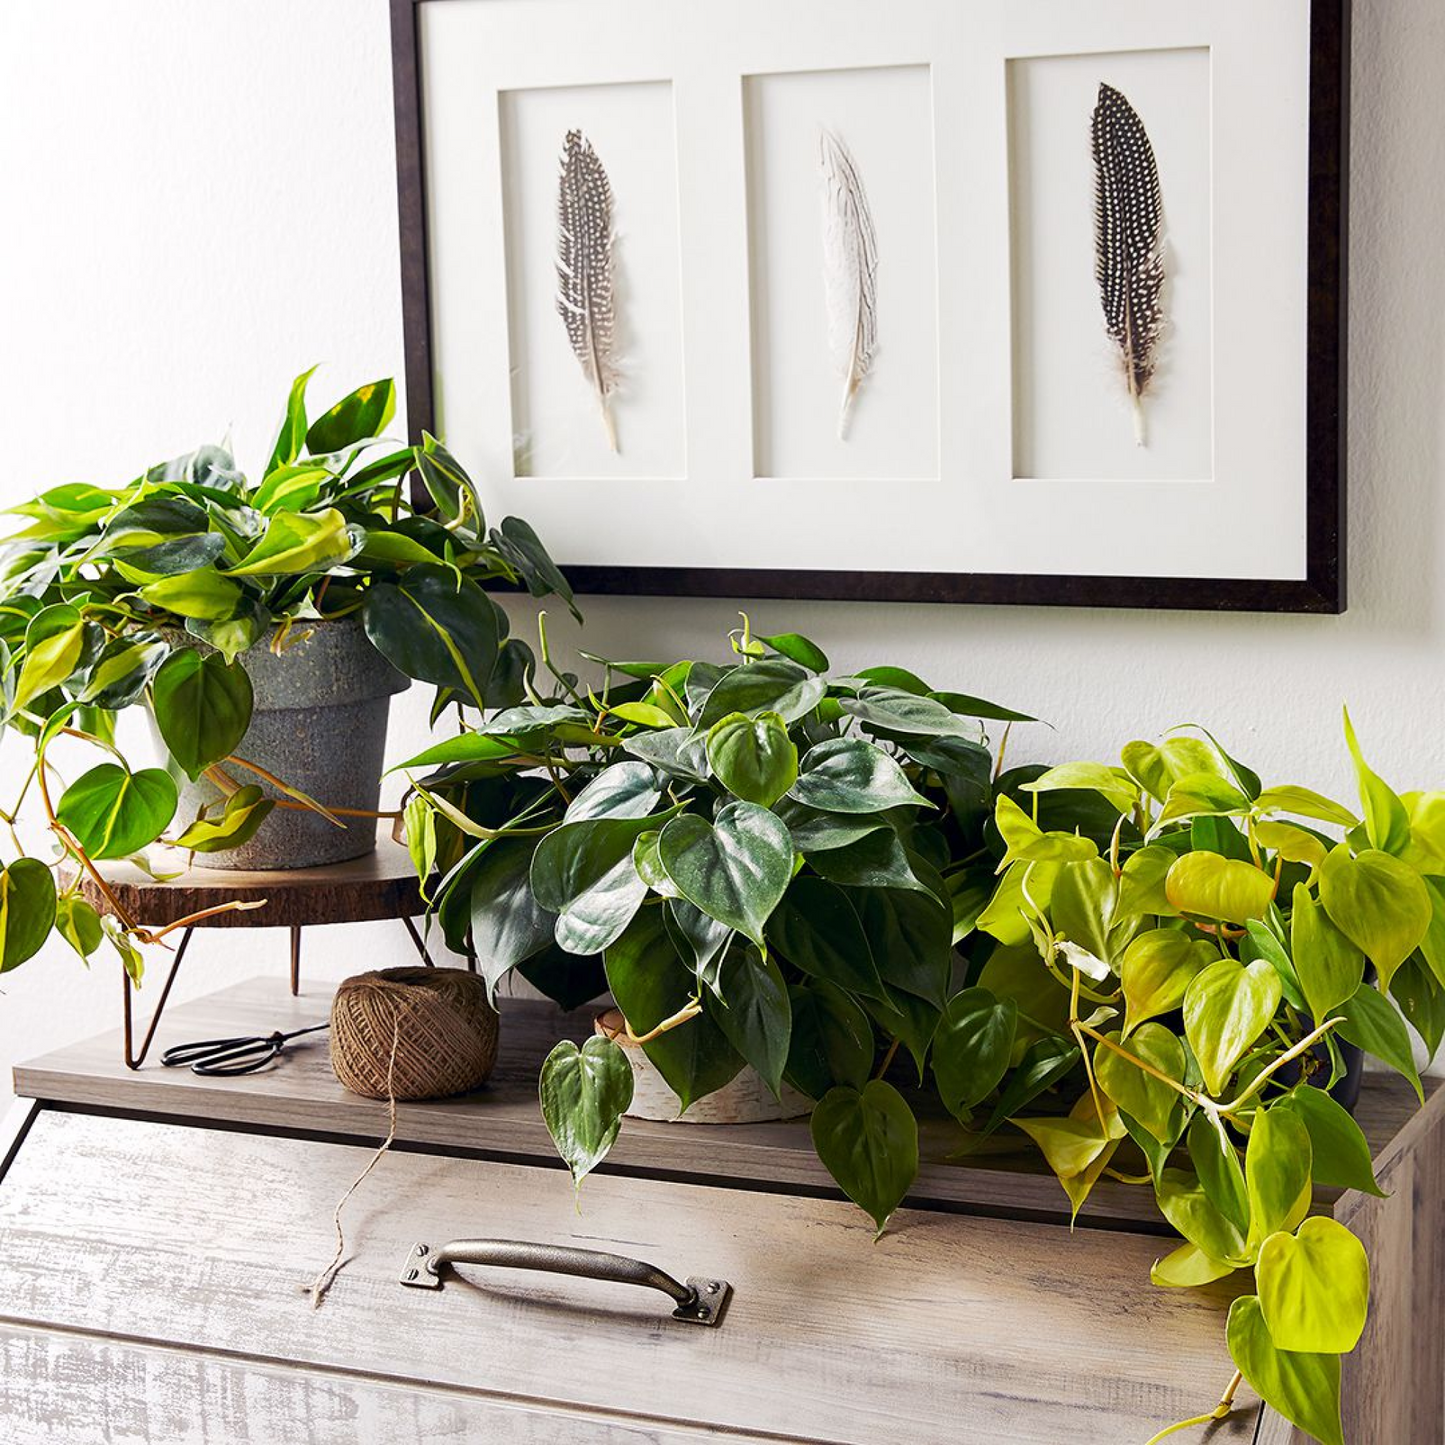 Transform home space receiving indirect light with houseplants